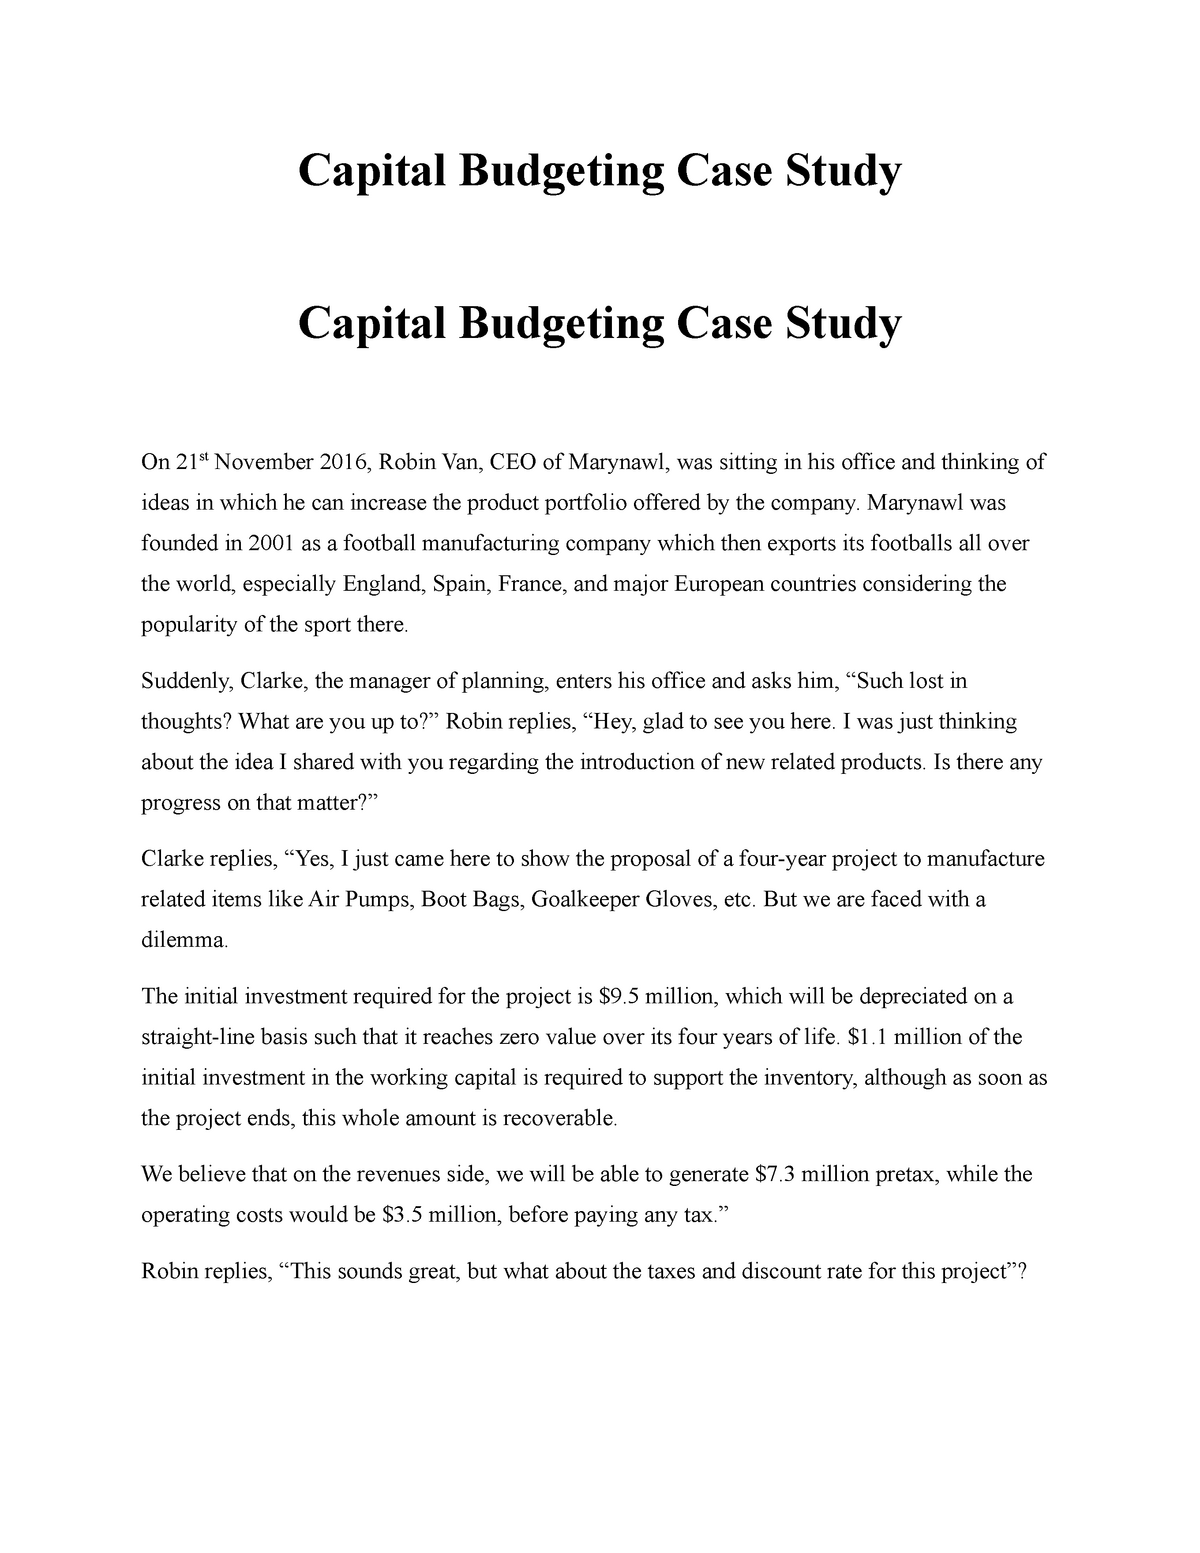 case study on capital budgeting of a company